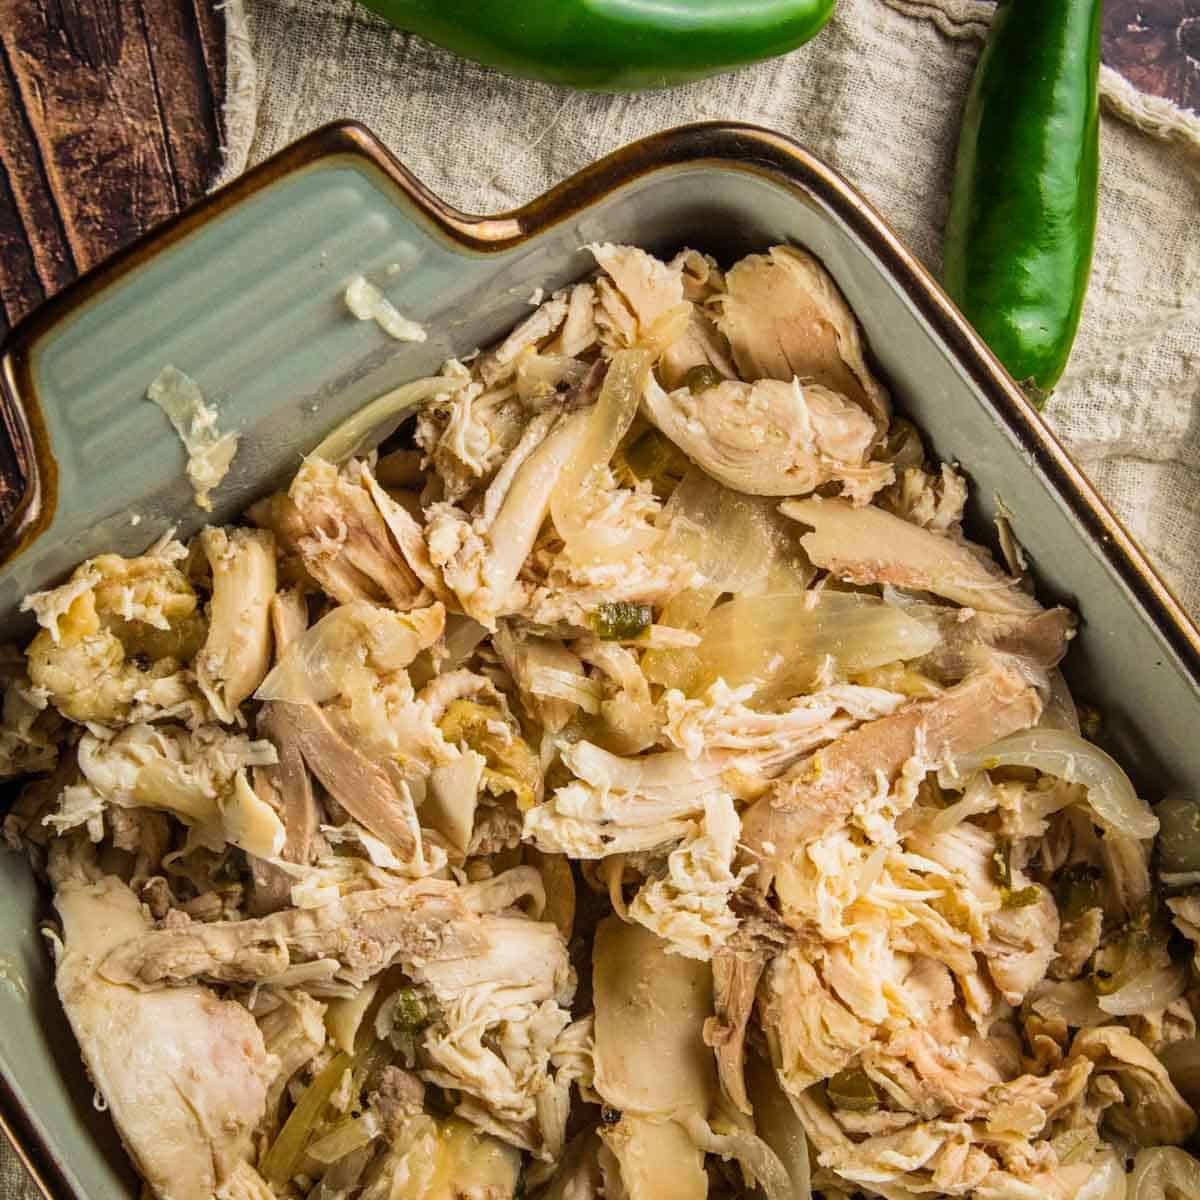 shredded chicken with onions and jalapenos in a ceramic baking dish